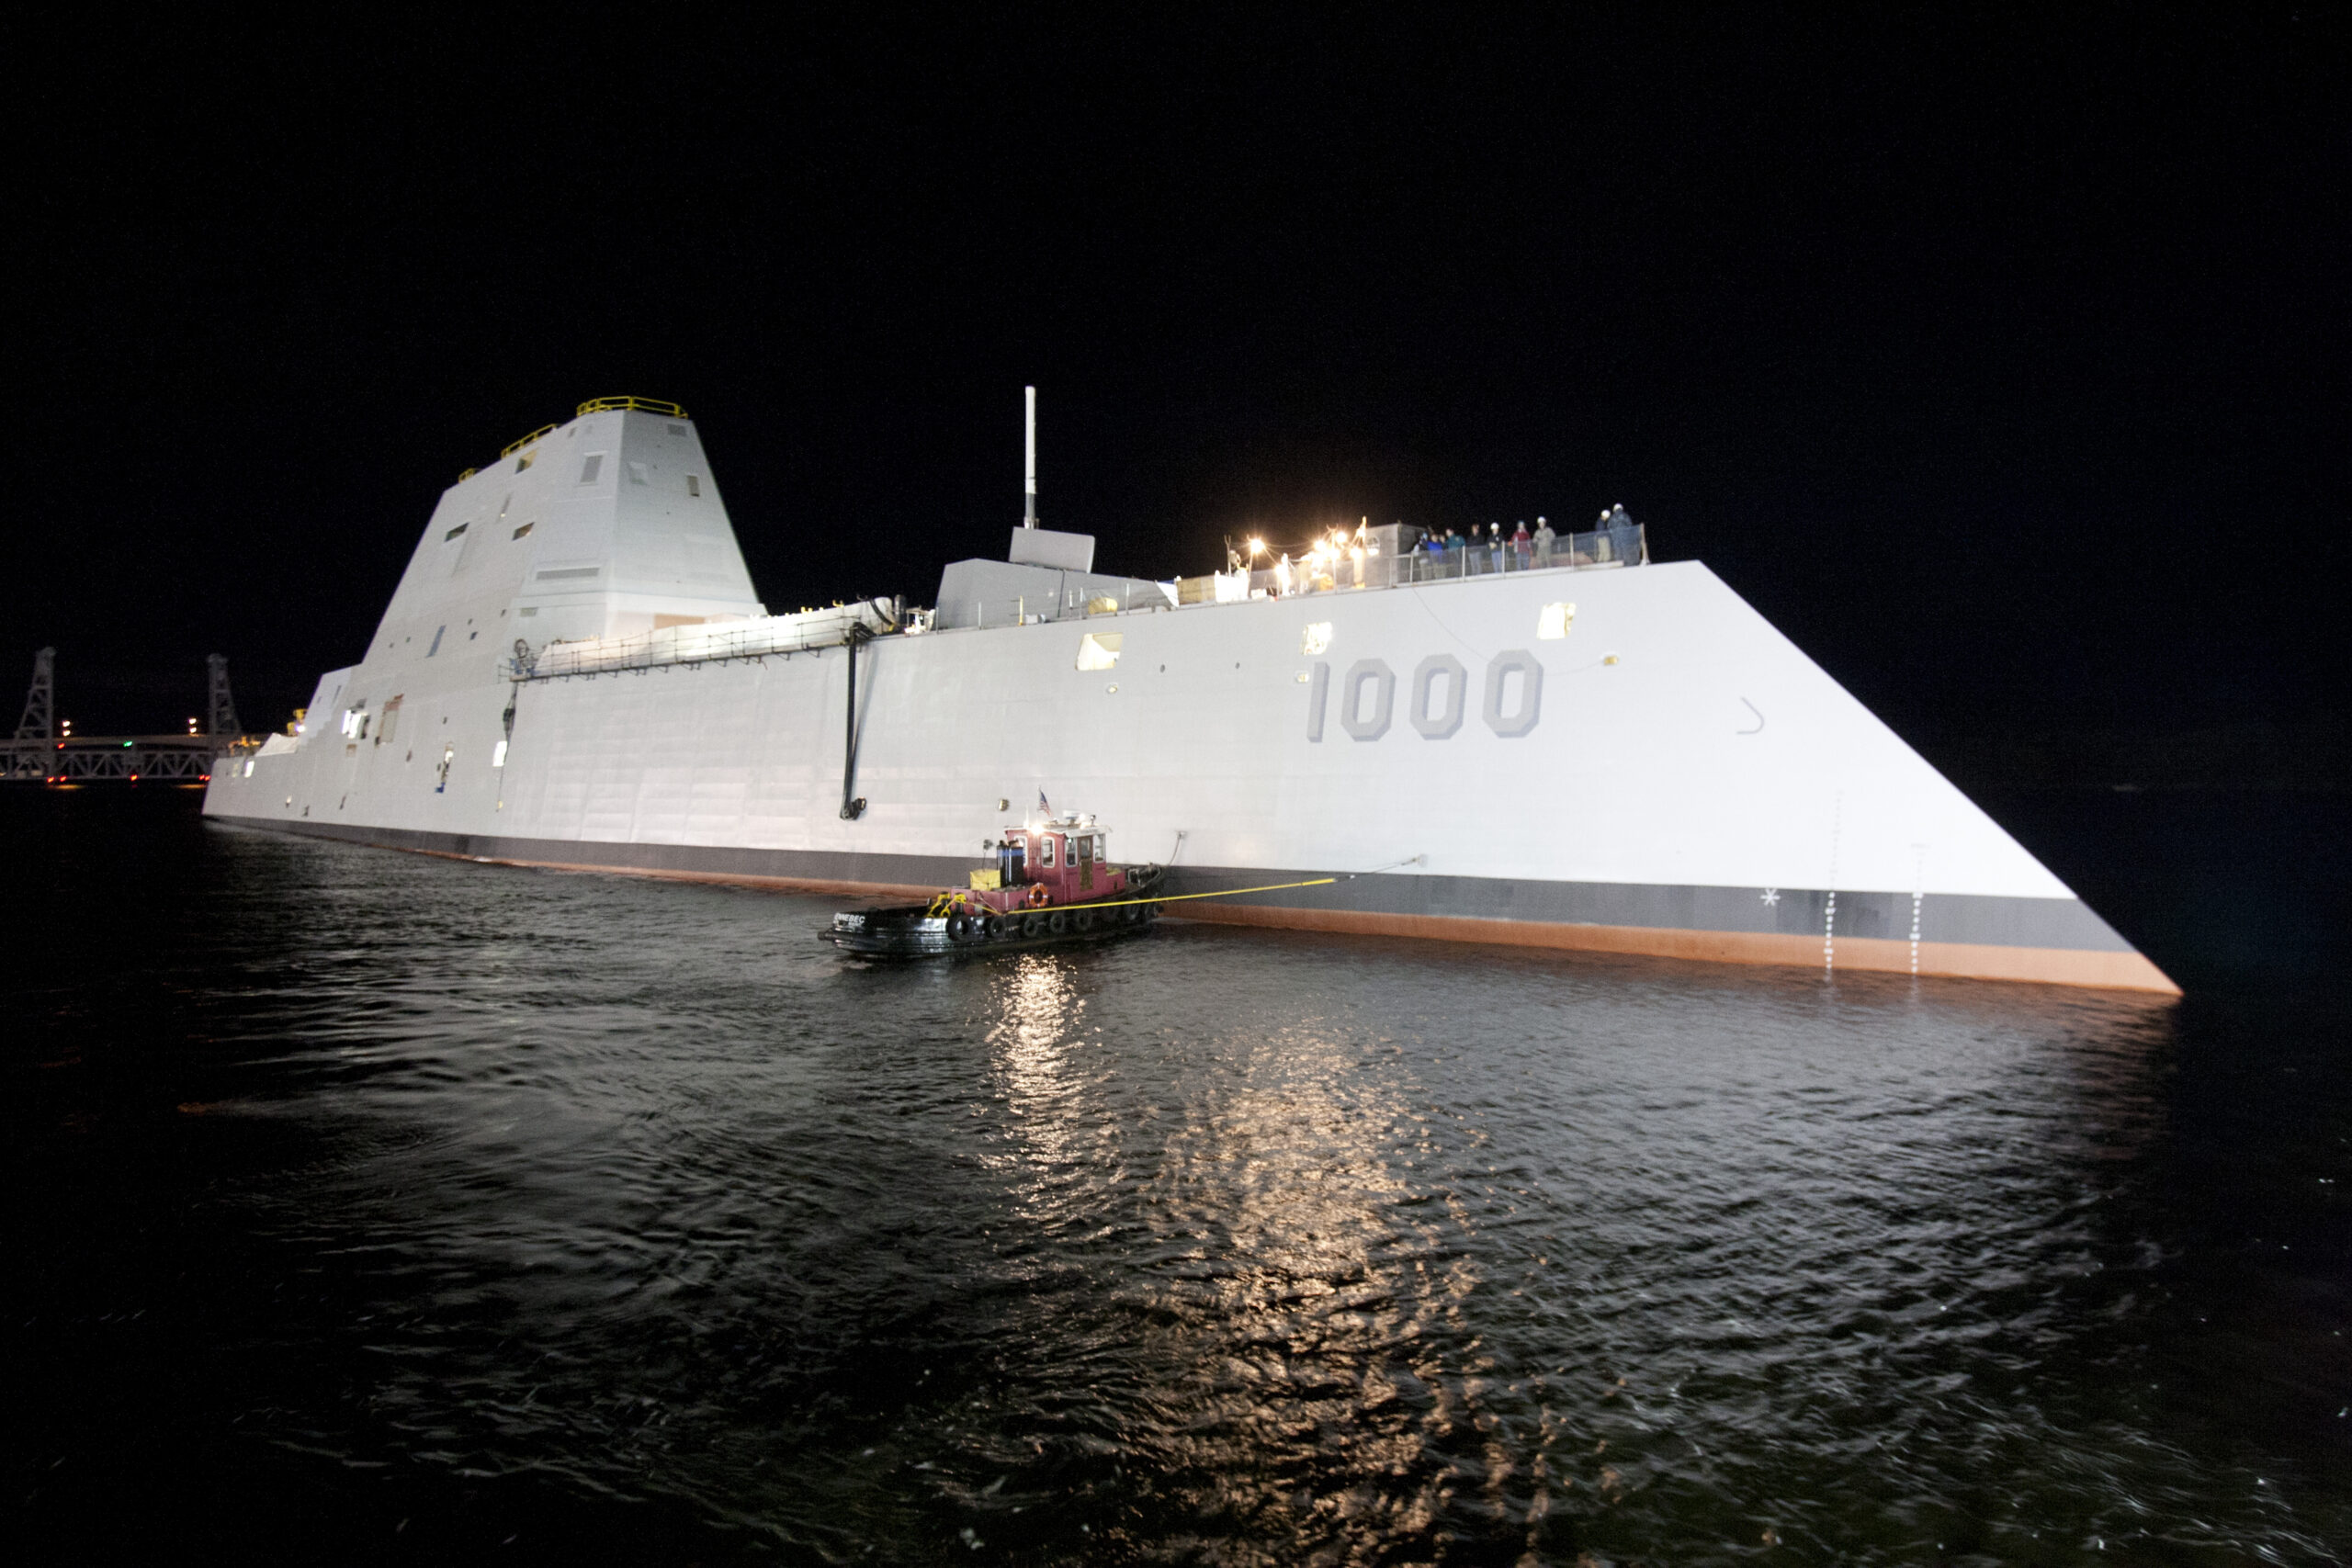 131028-O-ZZ999-103 BATH, Maine (Oct. 28, 2013) The Zumwalt-class guided-missile destroyer DDG 1000 is floated out of dry dock at the General Dynamics Bath Iron Works shipyard. The ship, the first of three Zumwalt-class destroyers, will provide independent forward presence and deterrence, support special operations forces and operate as part of joint and combined expeditionary forces. The lead ship and class are named in honor of former Chief of Naval Operations Adm. Elmo R. "Bud" Zumwalt Jr., who served as chief of naval operations from 1970-1974. (U.S. Navy photo courtesy of General Dynamics/Released)